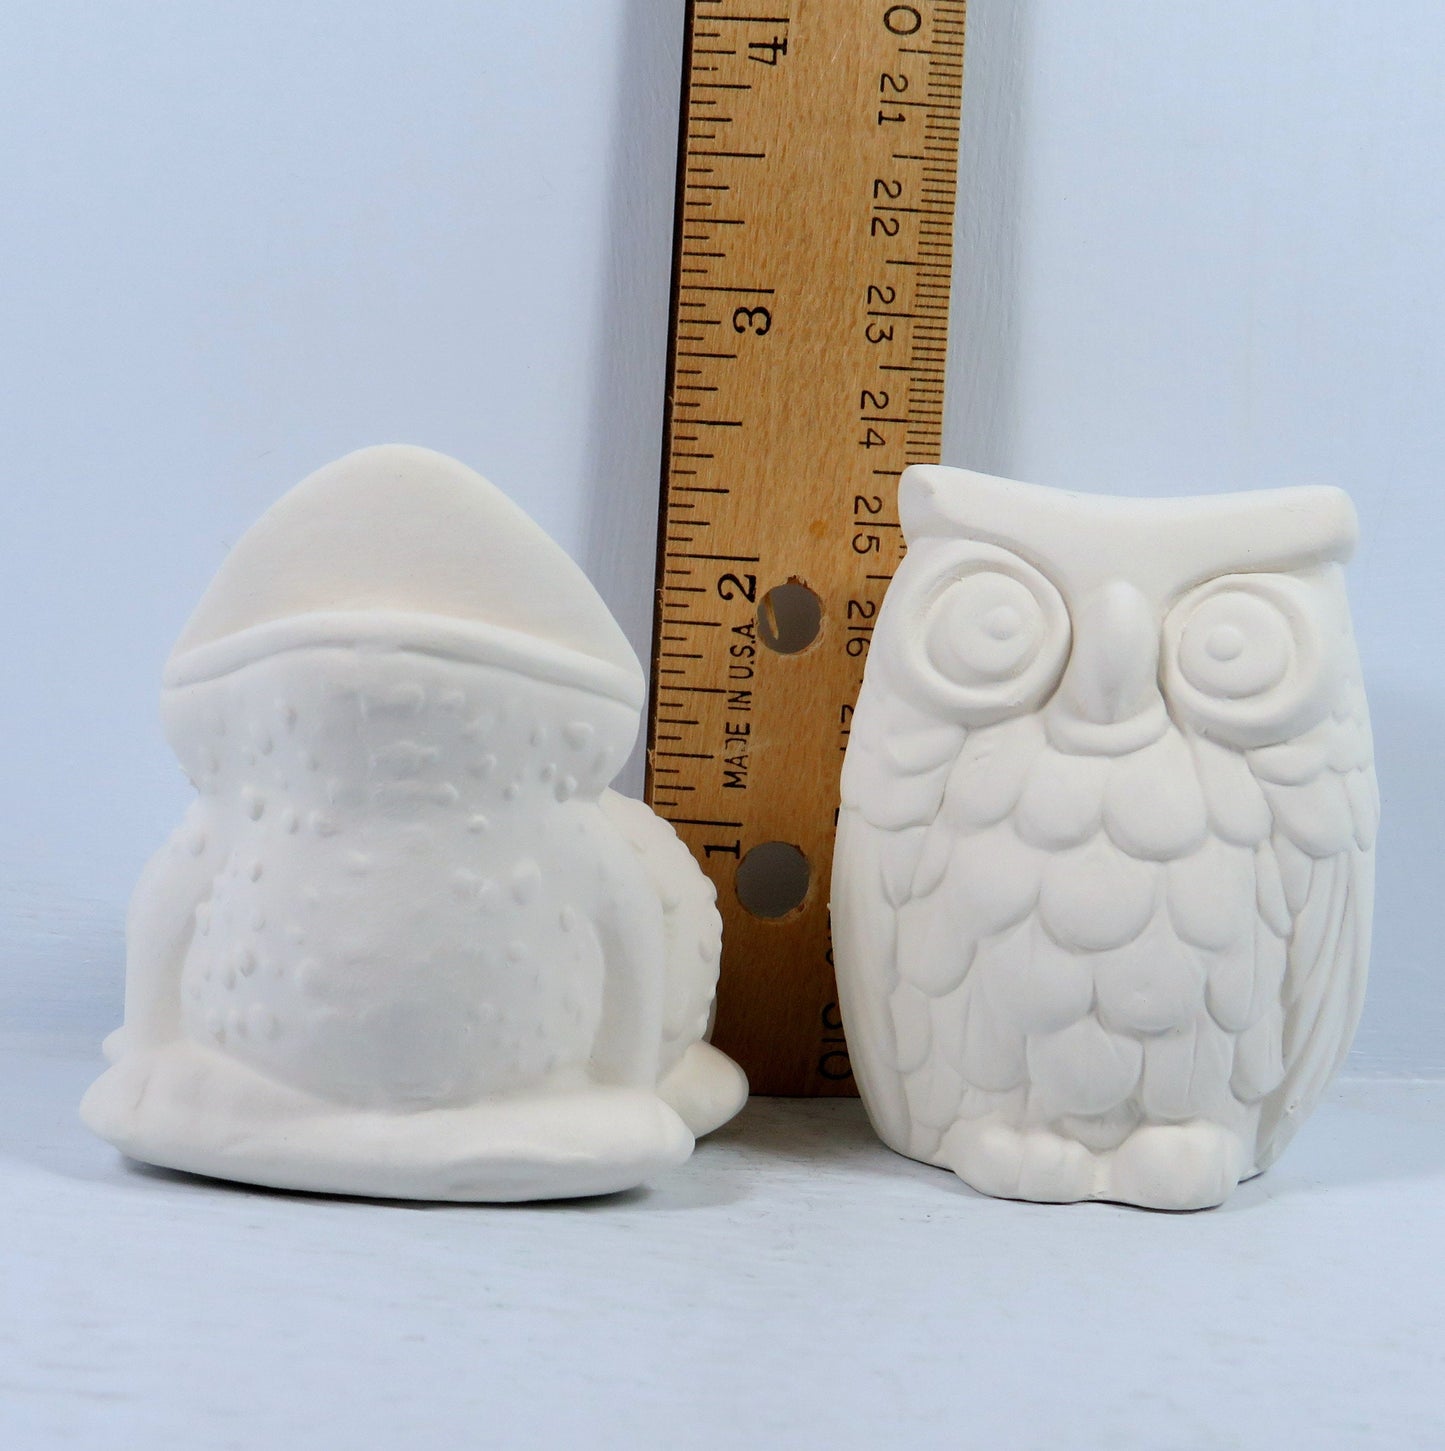 Handmade Ceramic Bisque Owl and Frog Figurines / Unpainted Owl Statue / Ready to Paint Frog Statue / Ceramics to Paint / Owl Decor / Frog